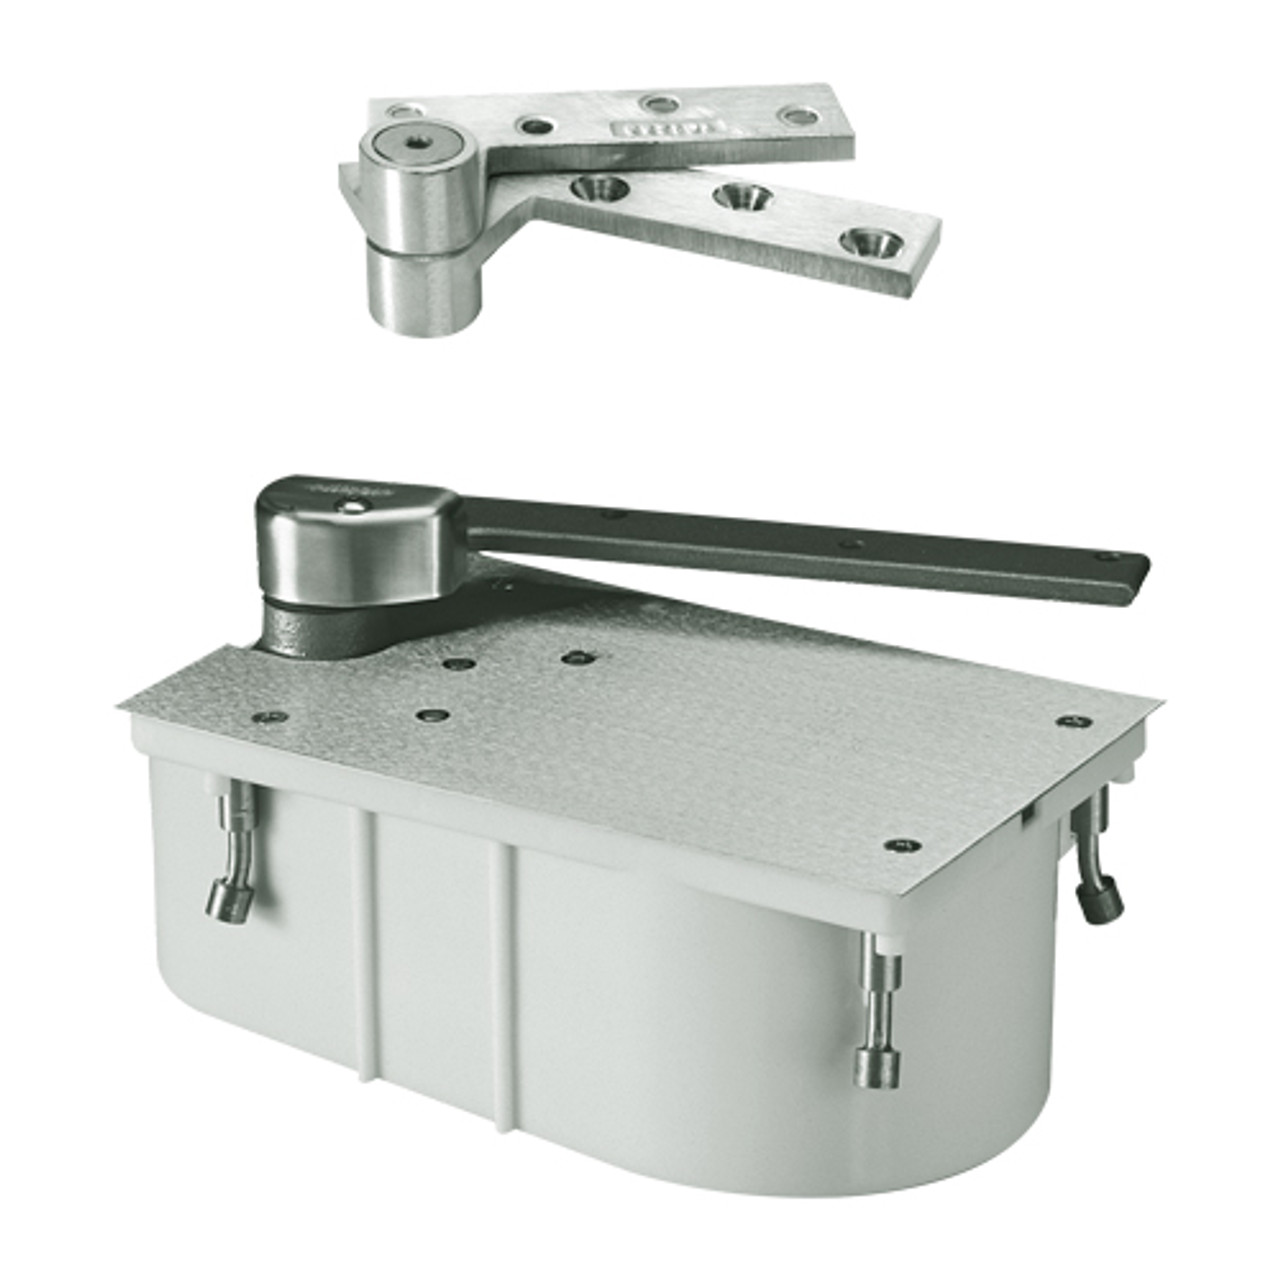 PH27-95S-LH-619 Rixson 27 Series Heavy Duty 3/4" Offset Hung Floor Closer with Physically Handicapped Opening Force in Satin Nickel Finish